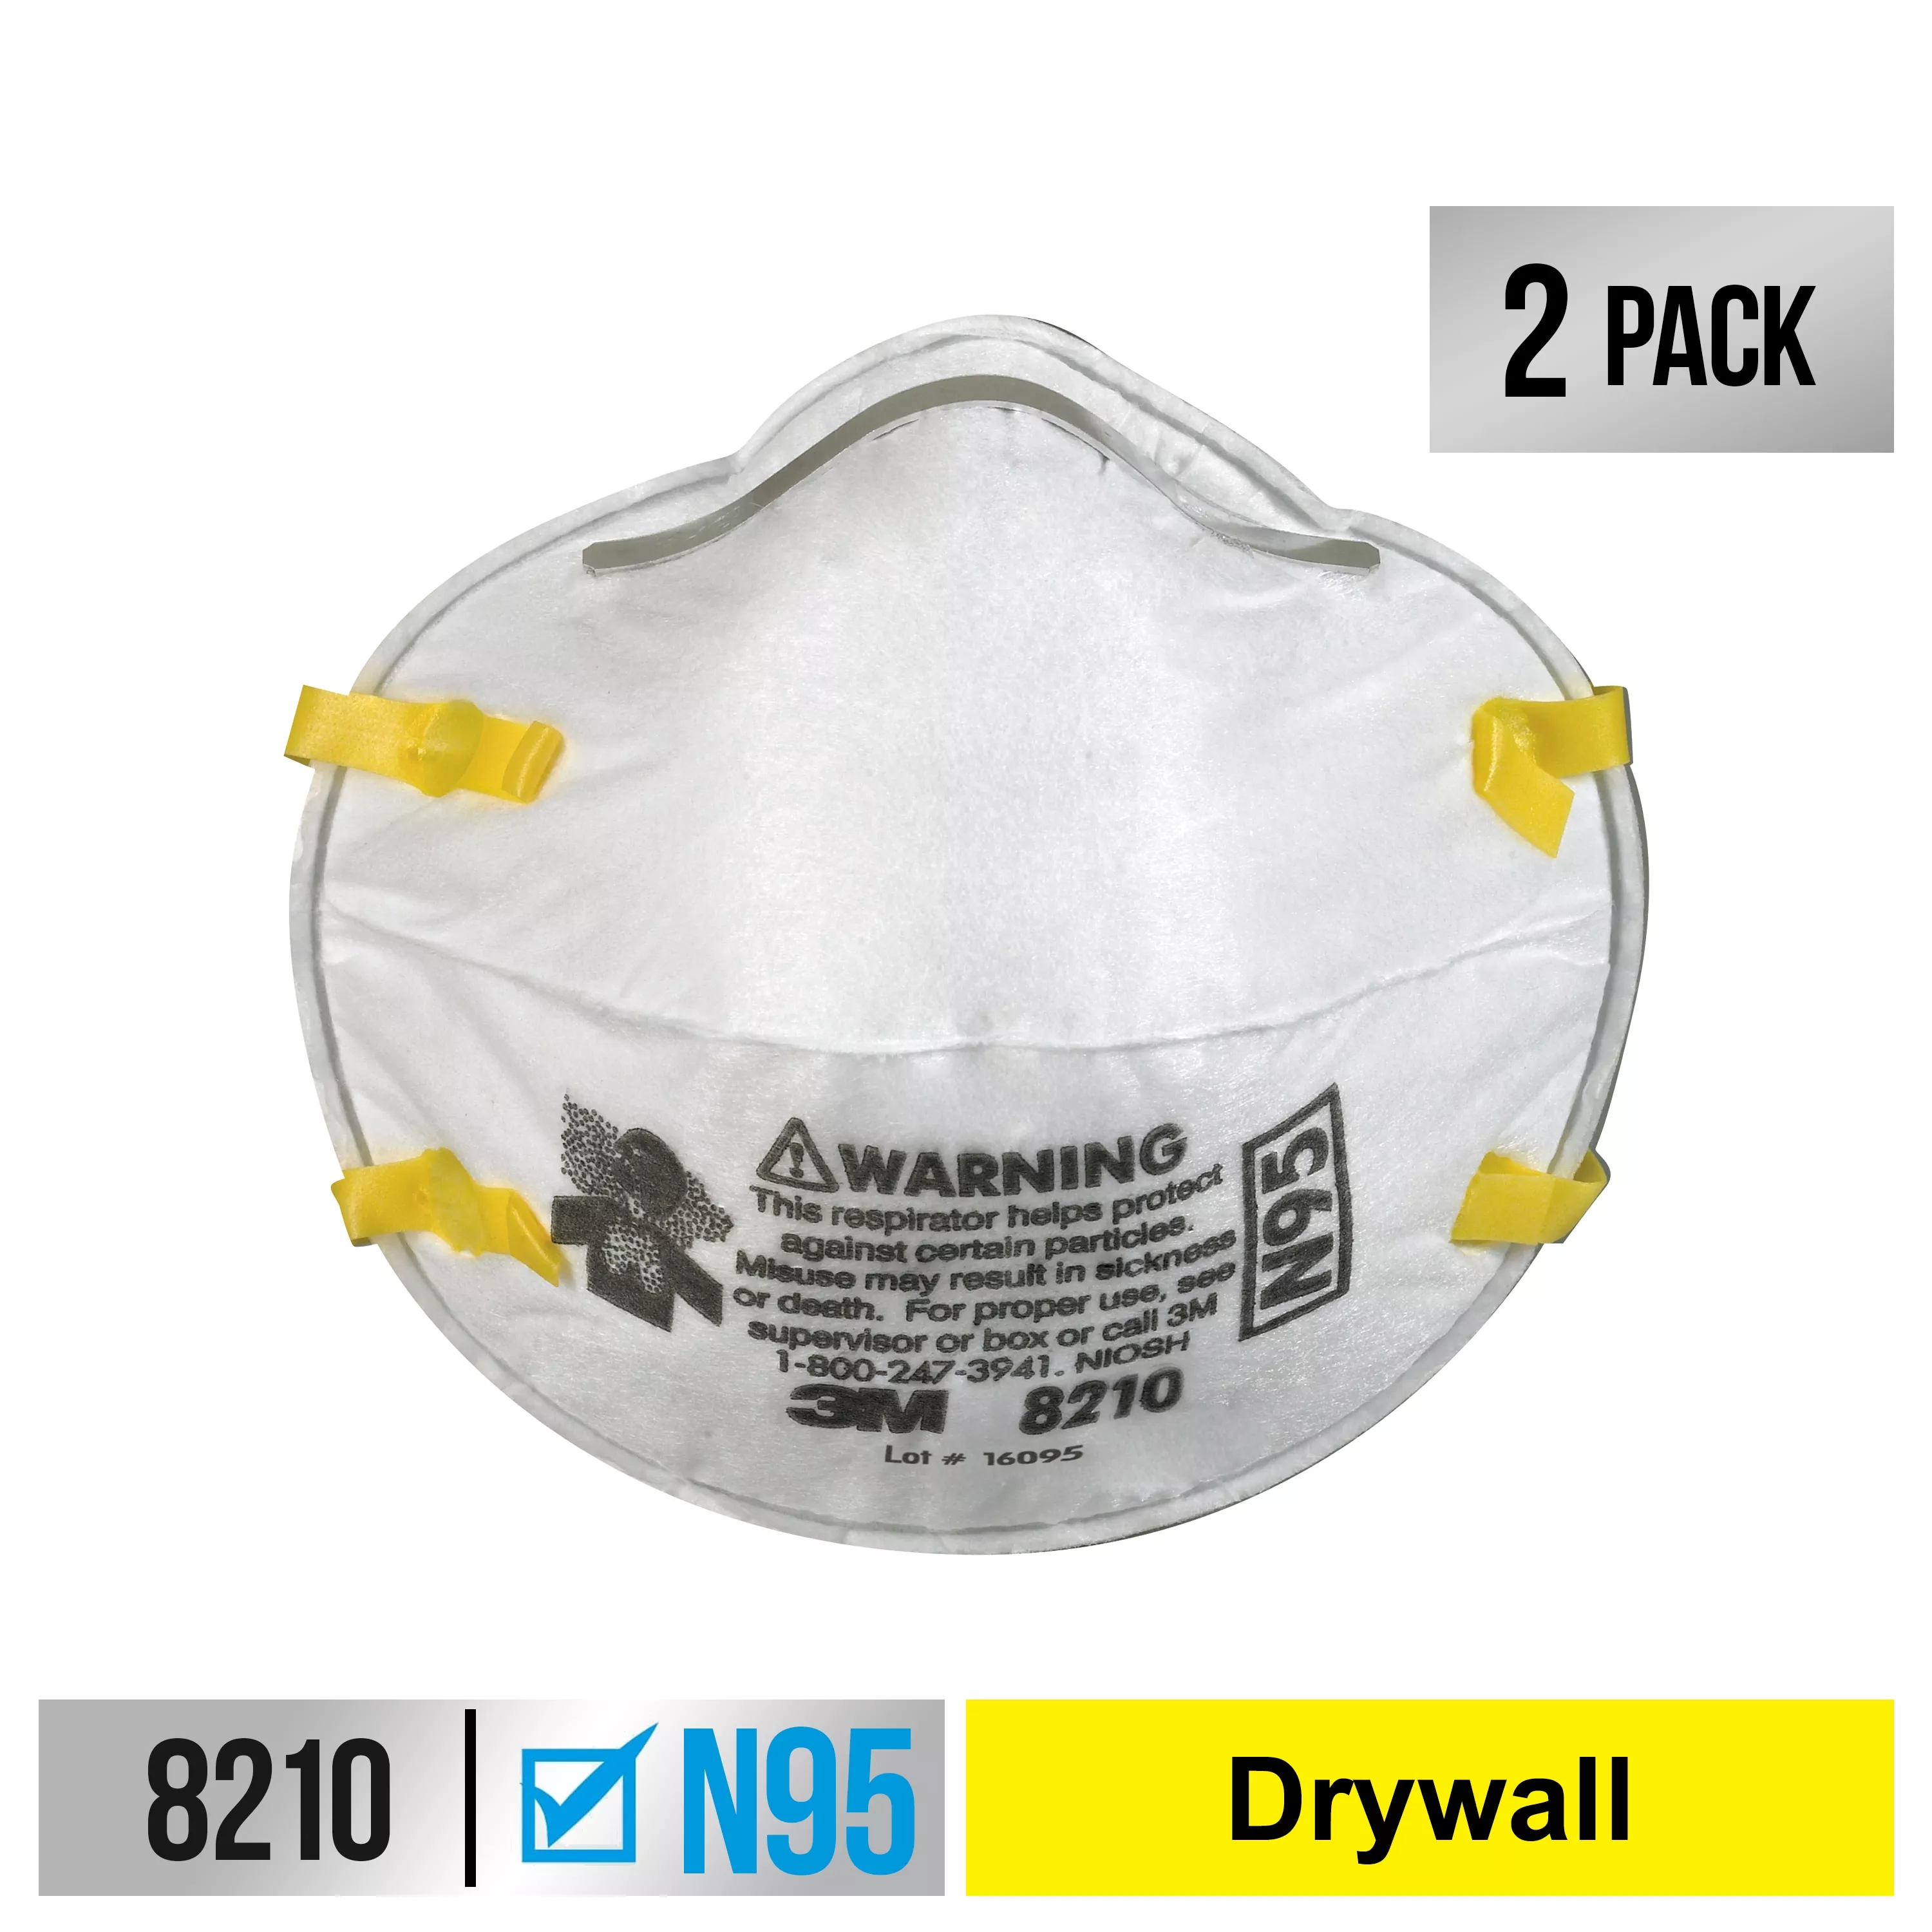 3M™ Performance Drywall Sanding Respirator N95 Particulate, 8210D2-DC, 2
eaches/pack, 12 packs/case